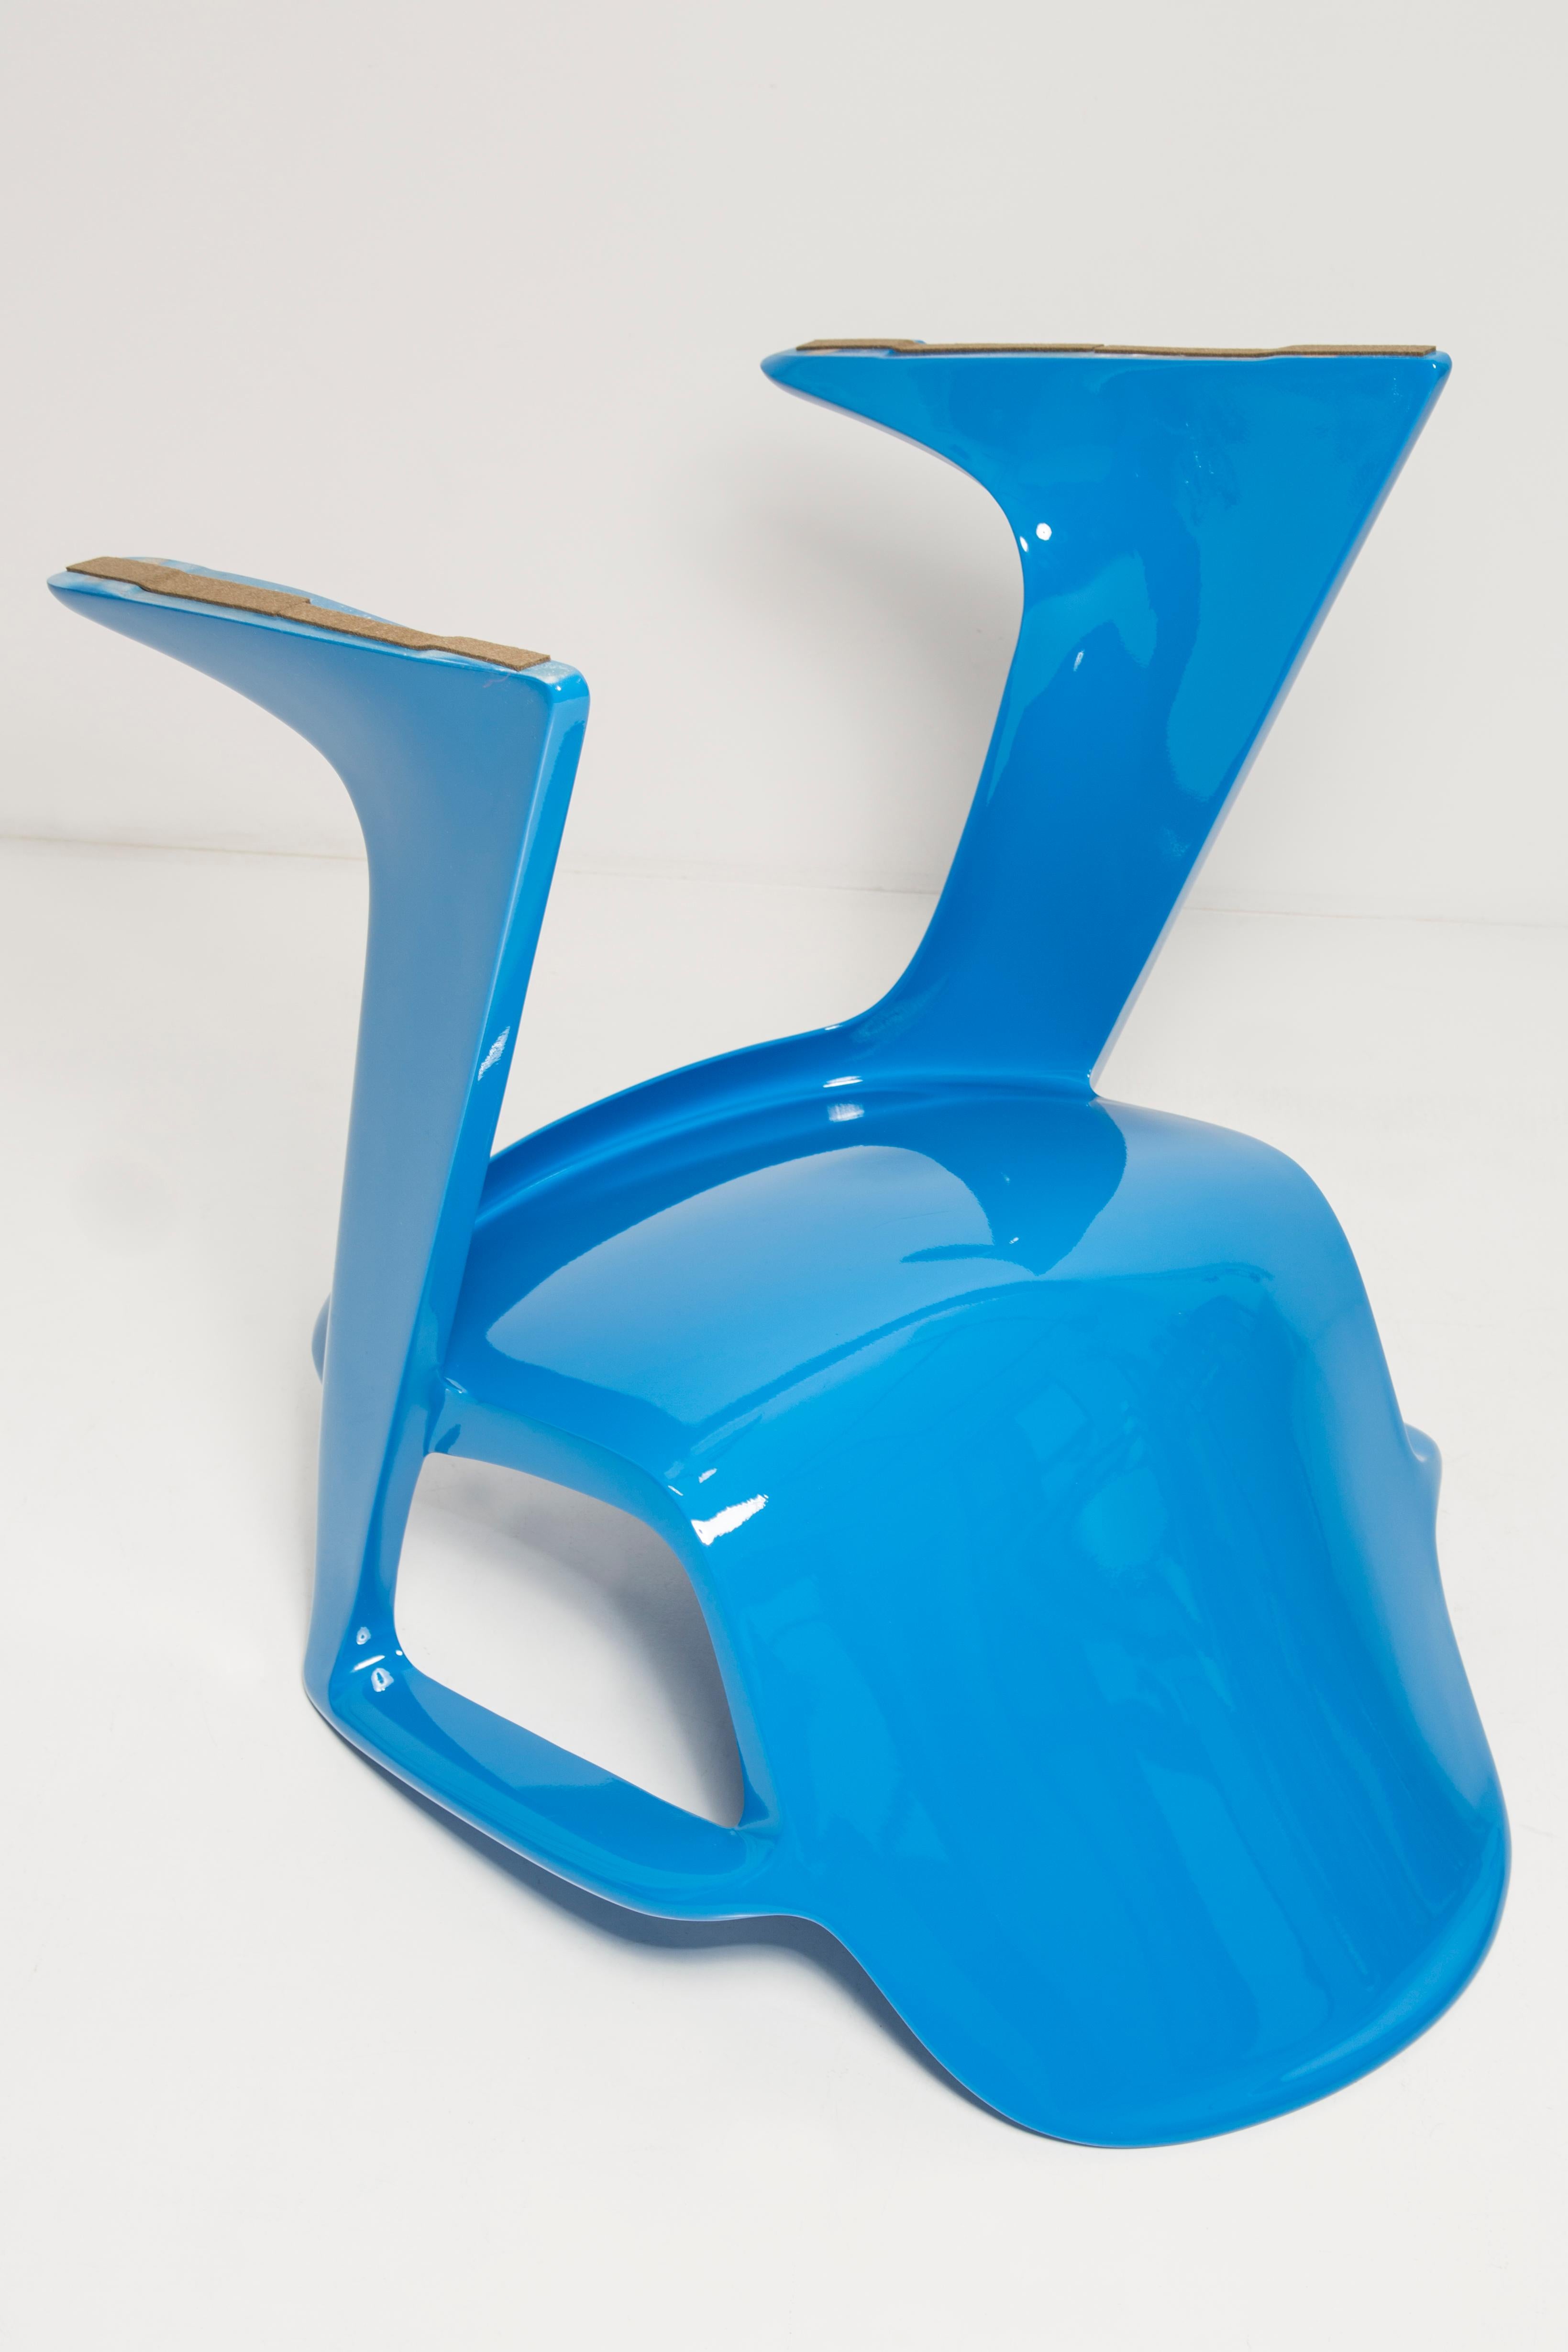 Set of Two Blue Kangaroo Chairs Designed by Ernst Moeckl, Germany, 1968 For Sale 8